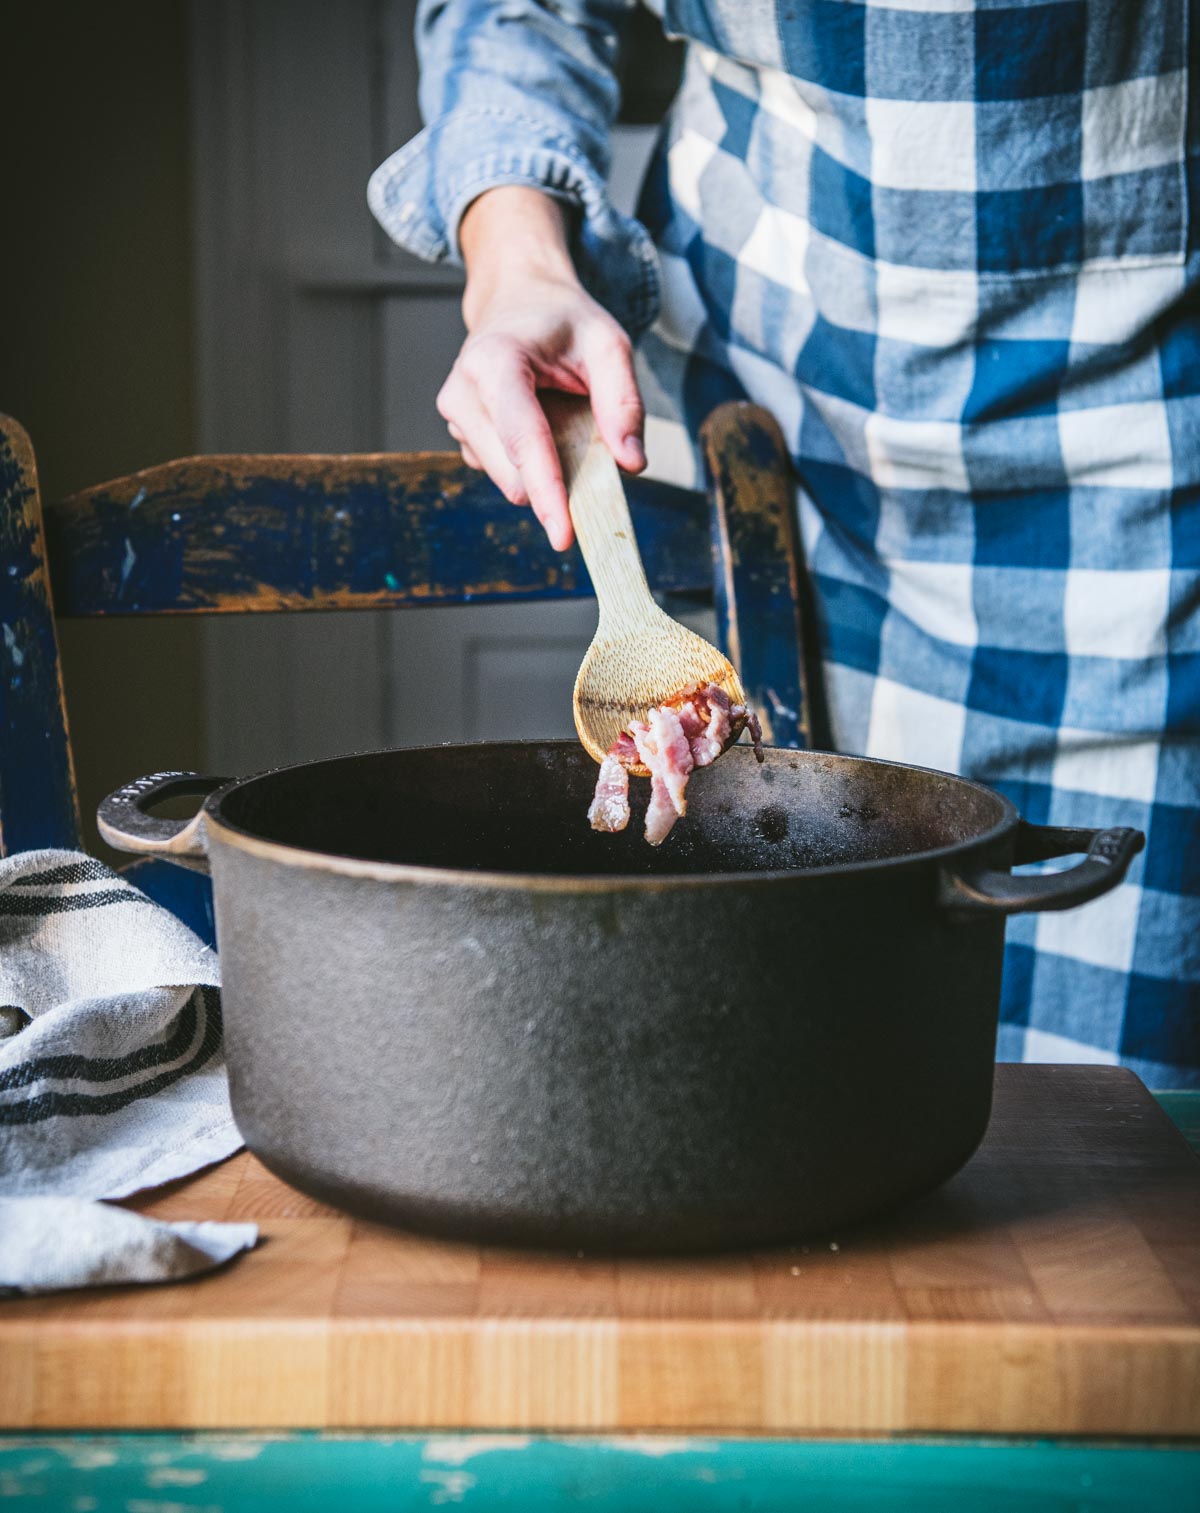 Cooking bacon in a Dutch oven